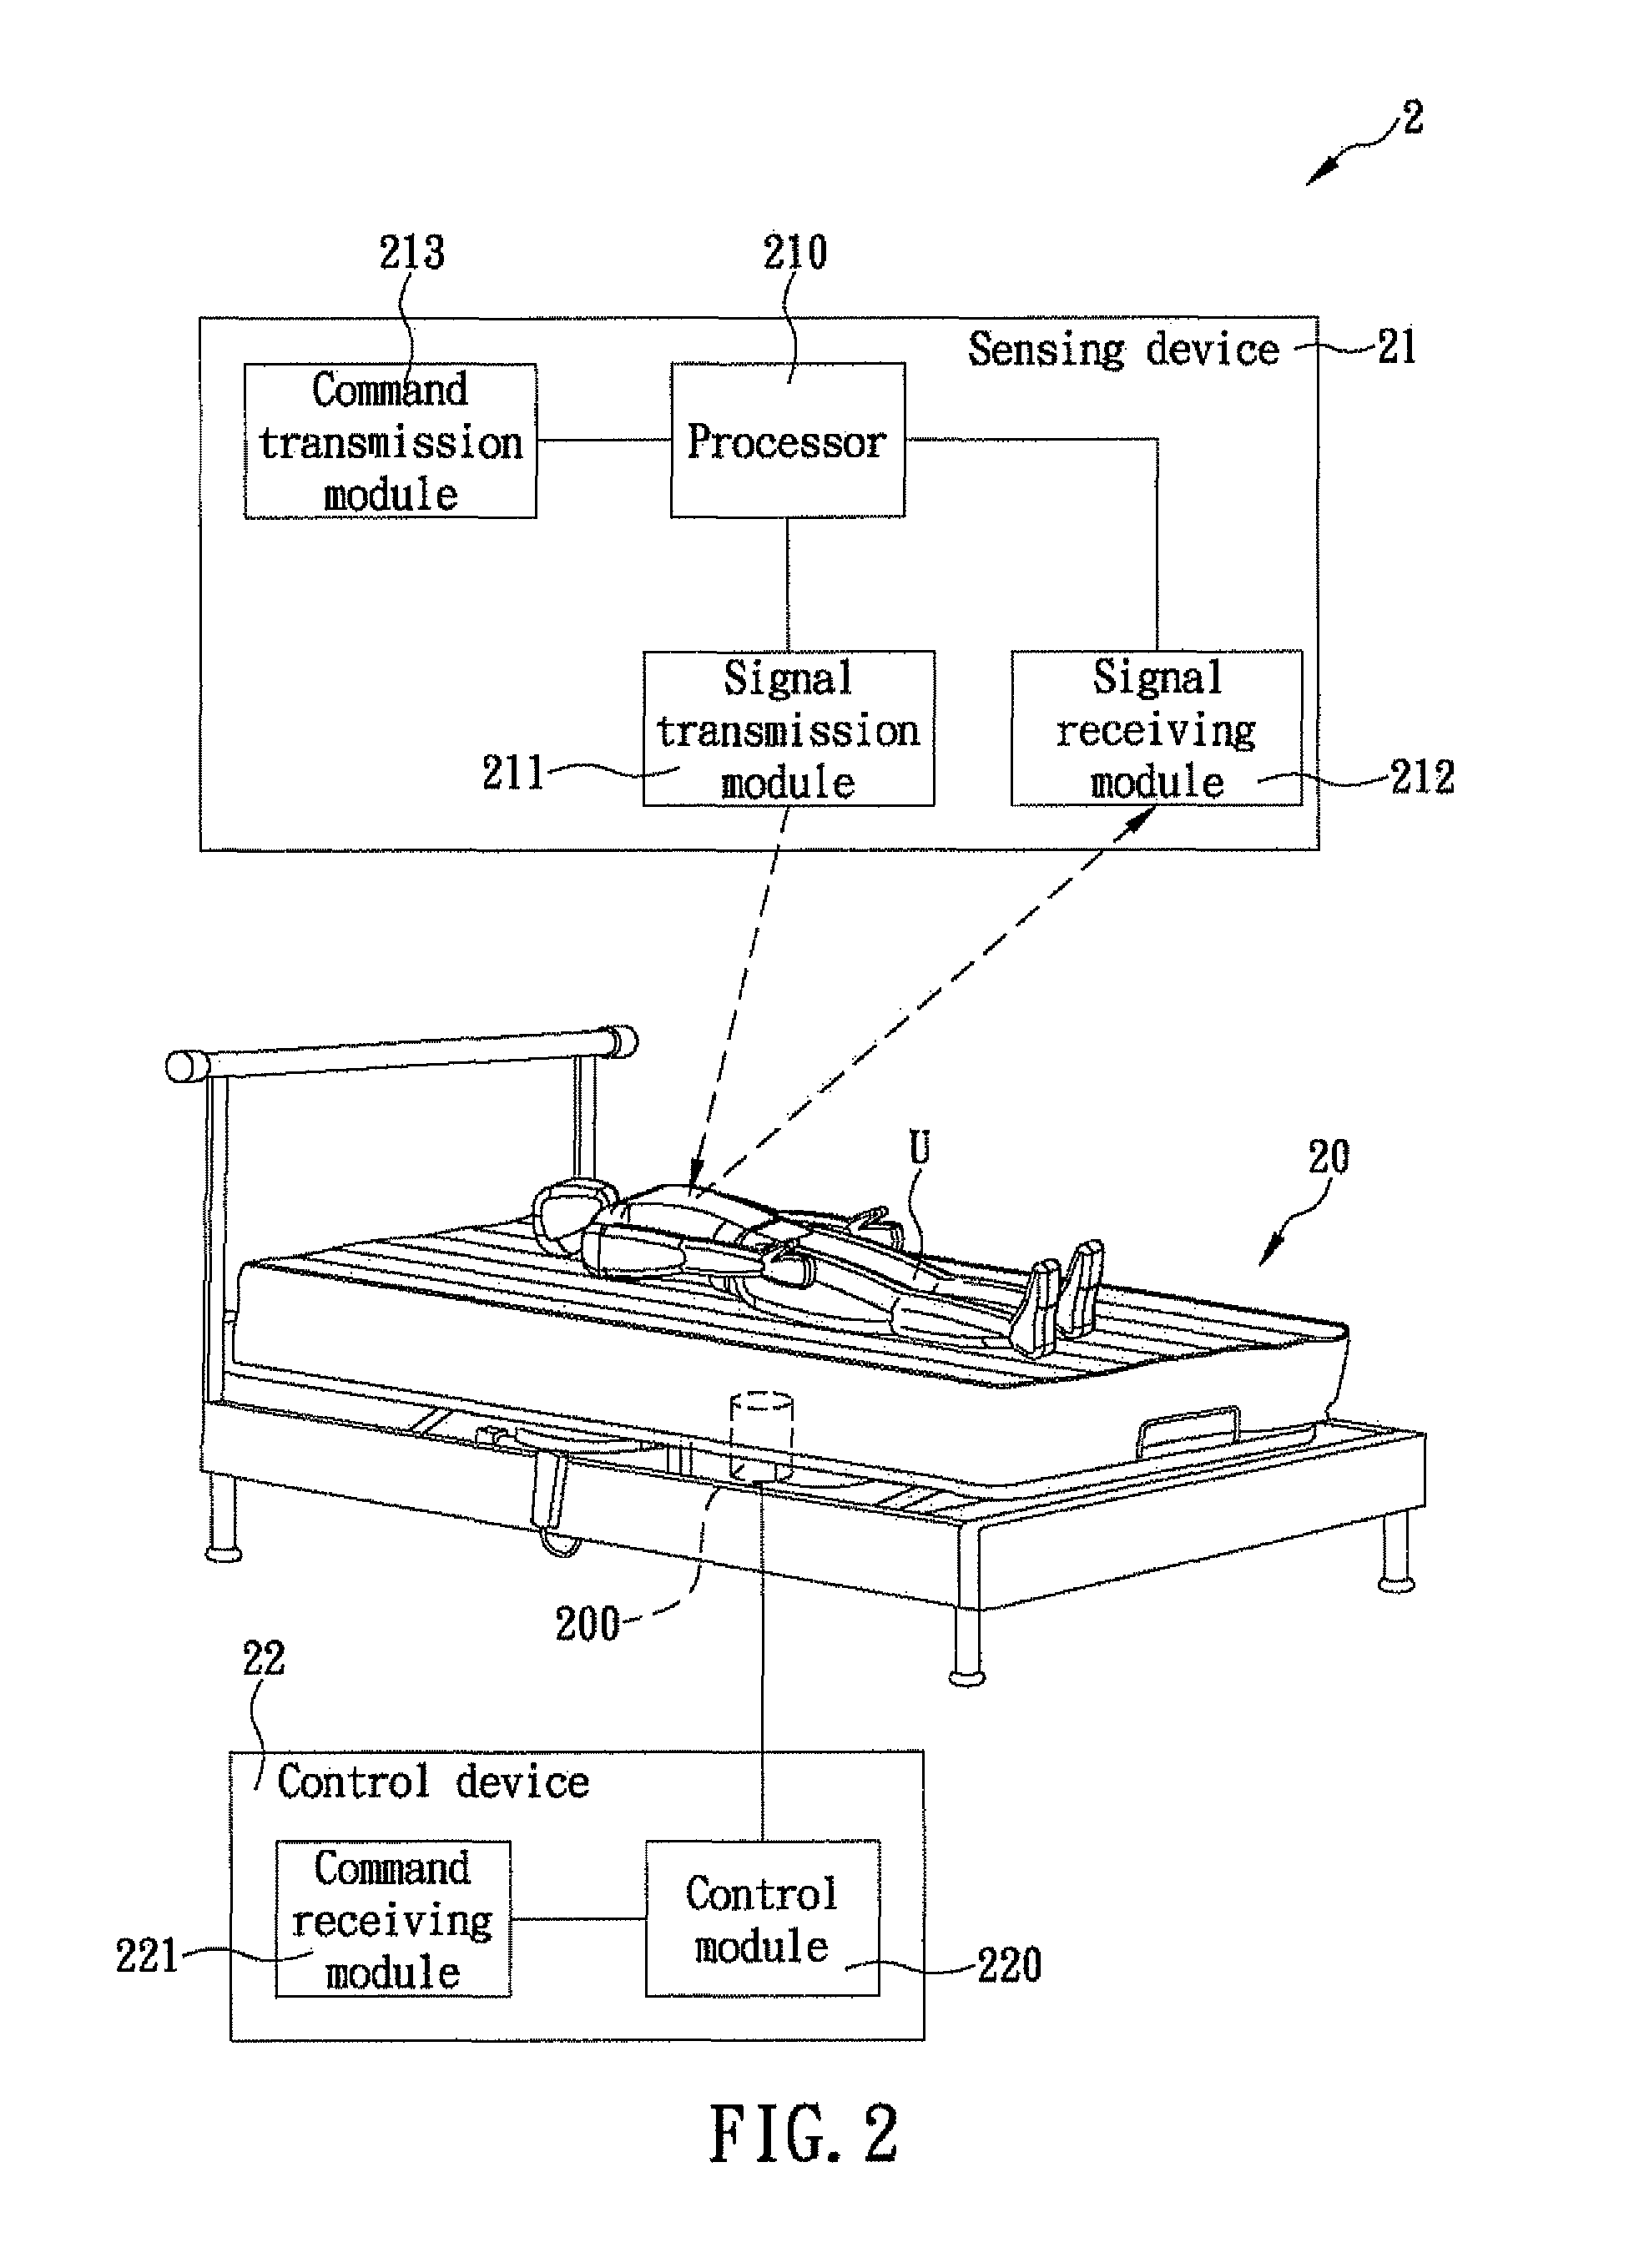 Automated anti-snoring bed system